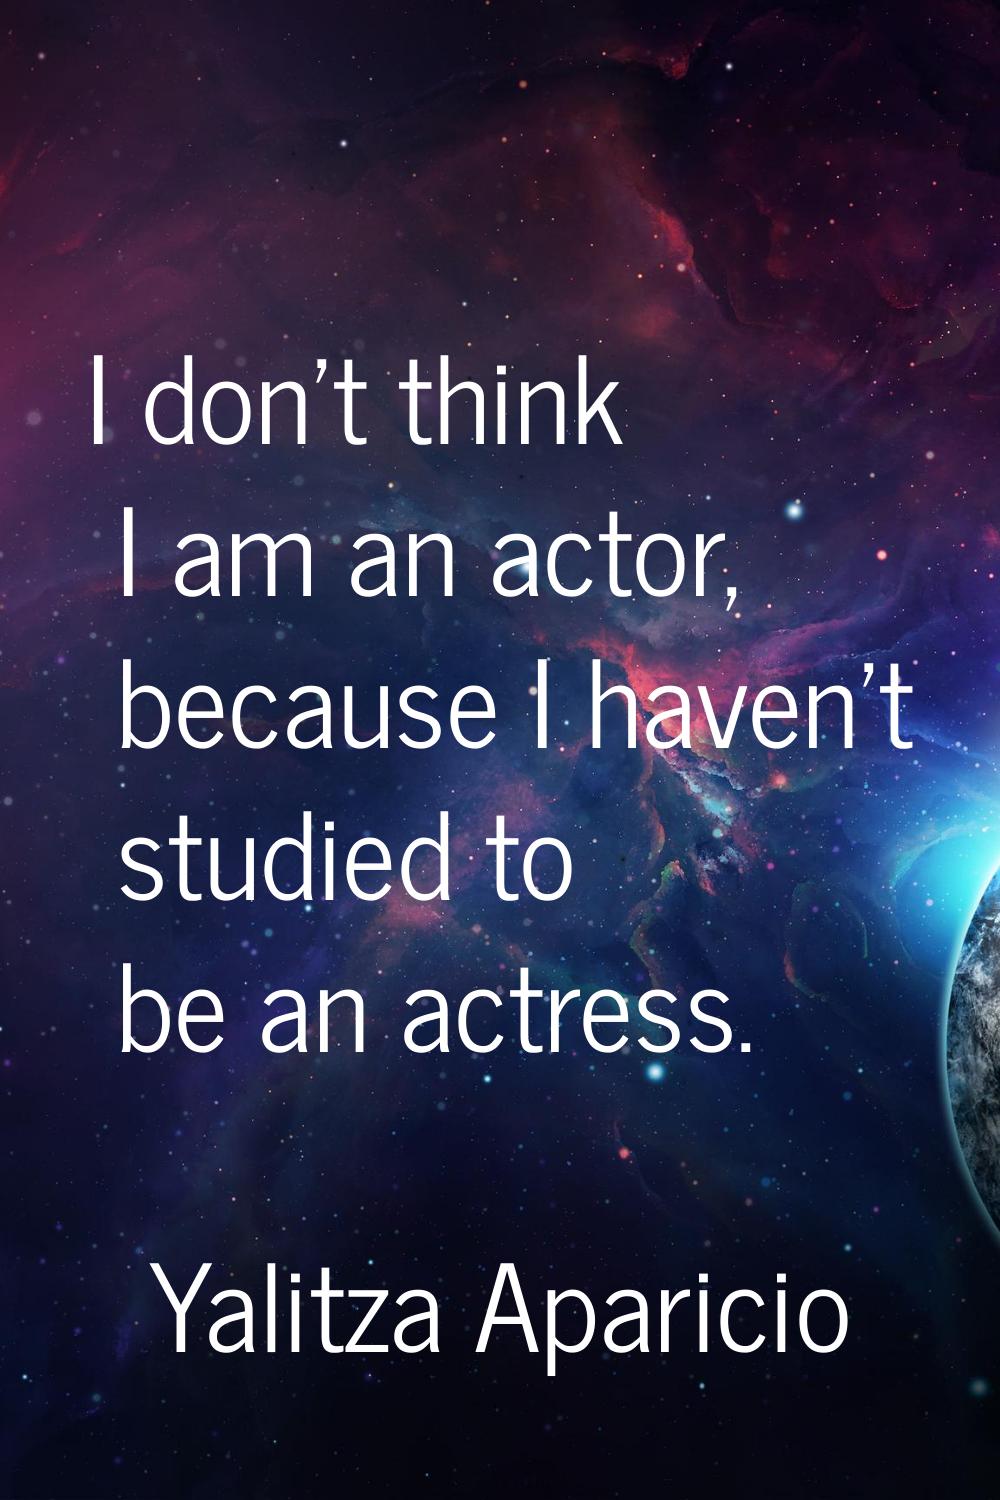 I don't think I am an actor, because I haven't studied to be an actress.